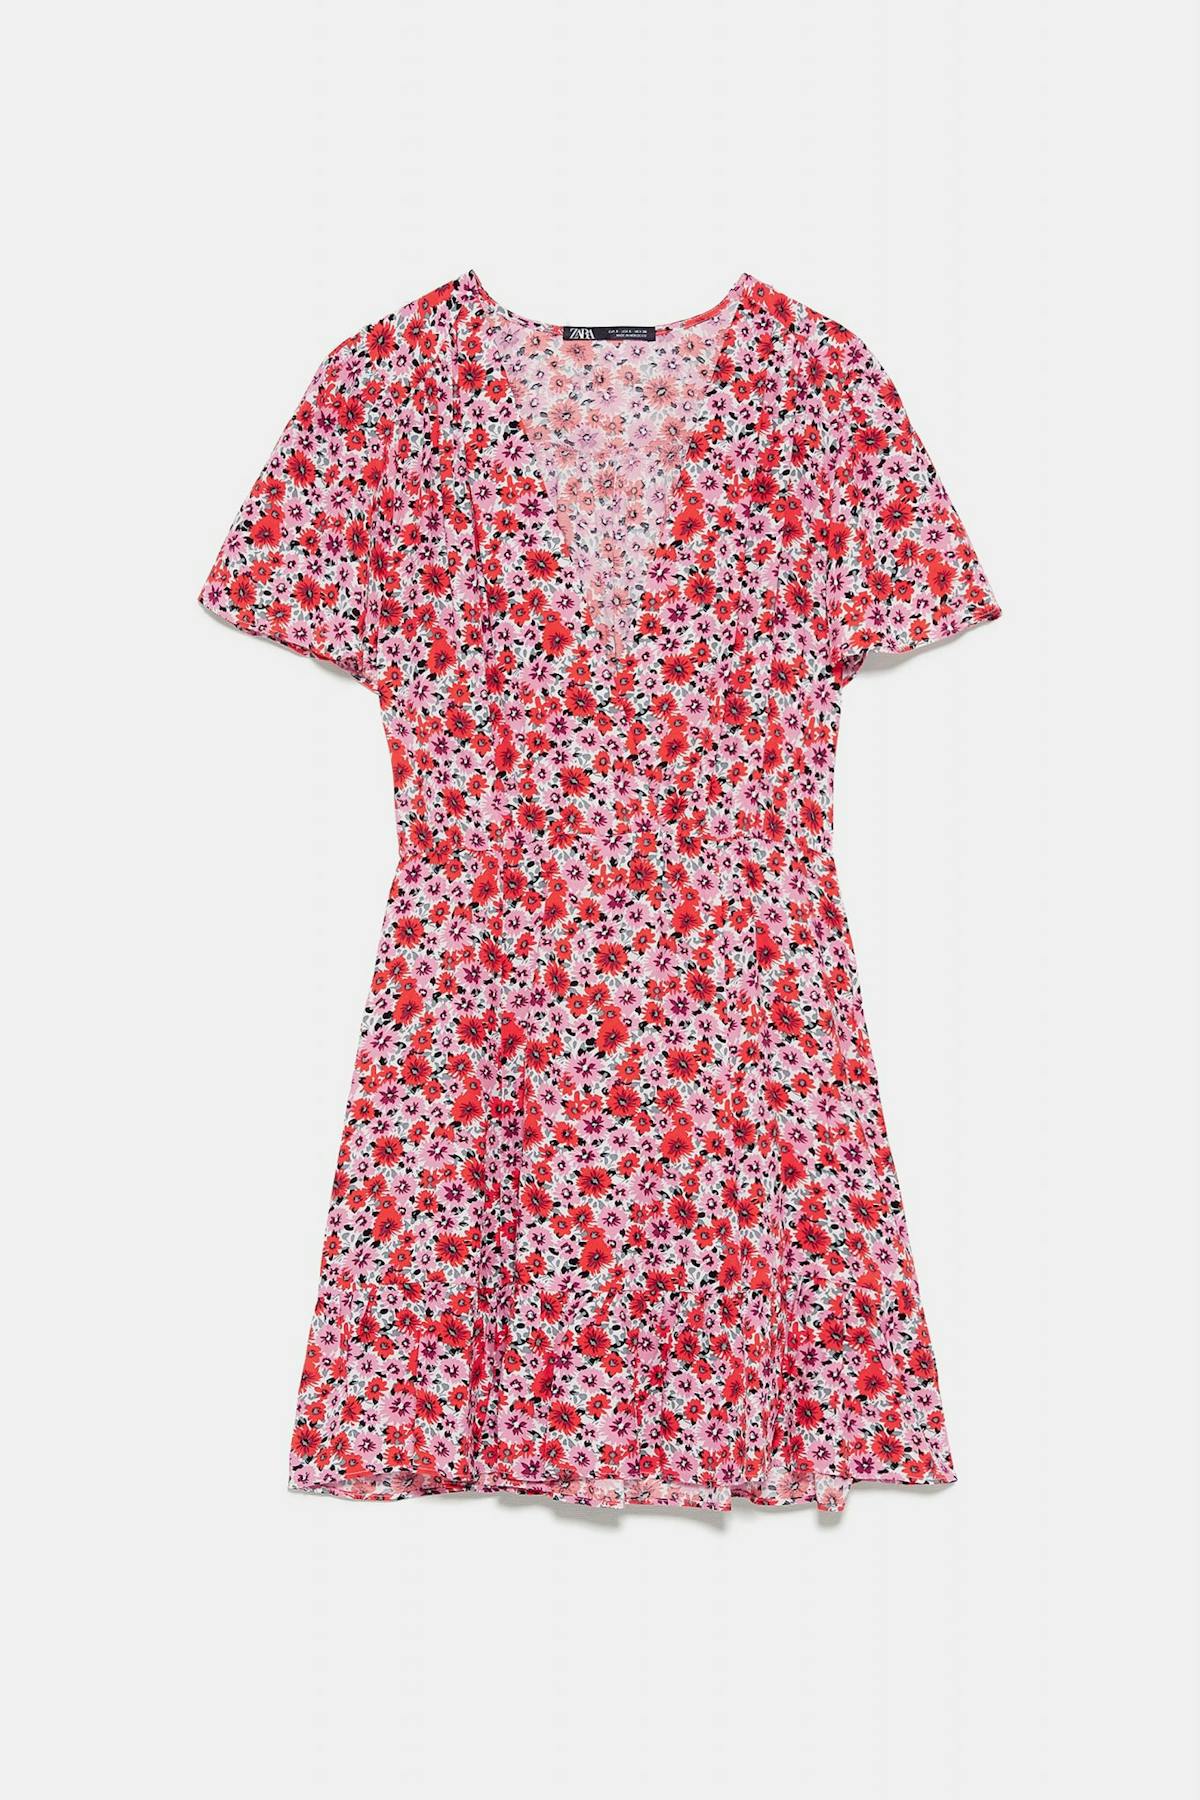 Fleabag red dress: Where to buy red floral dress